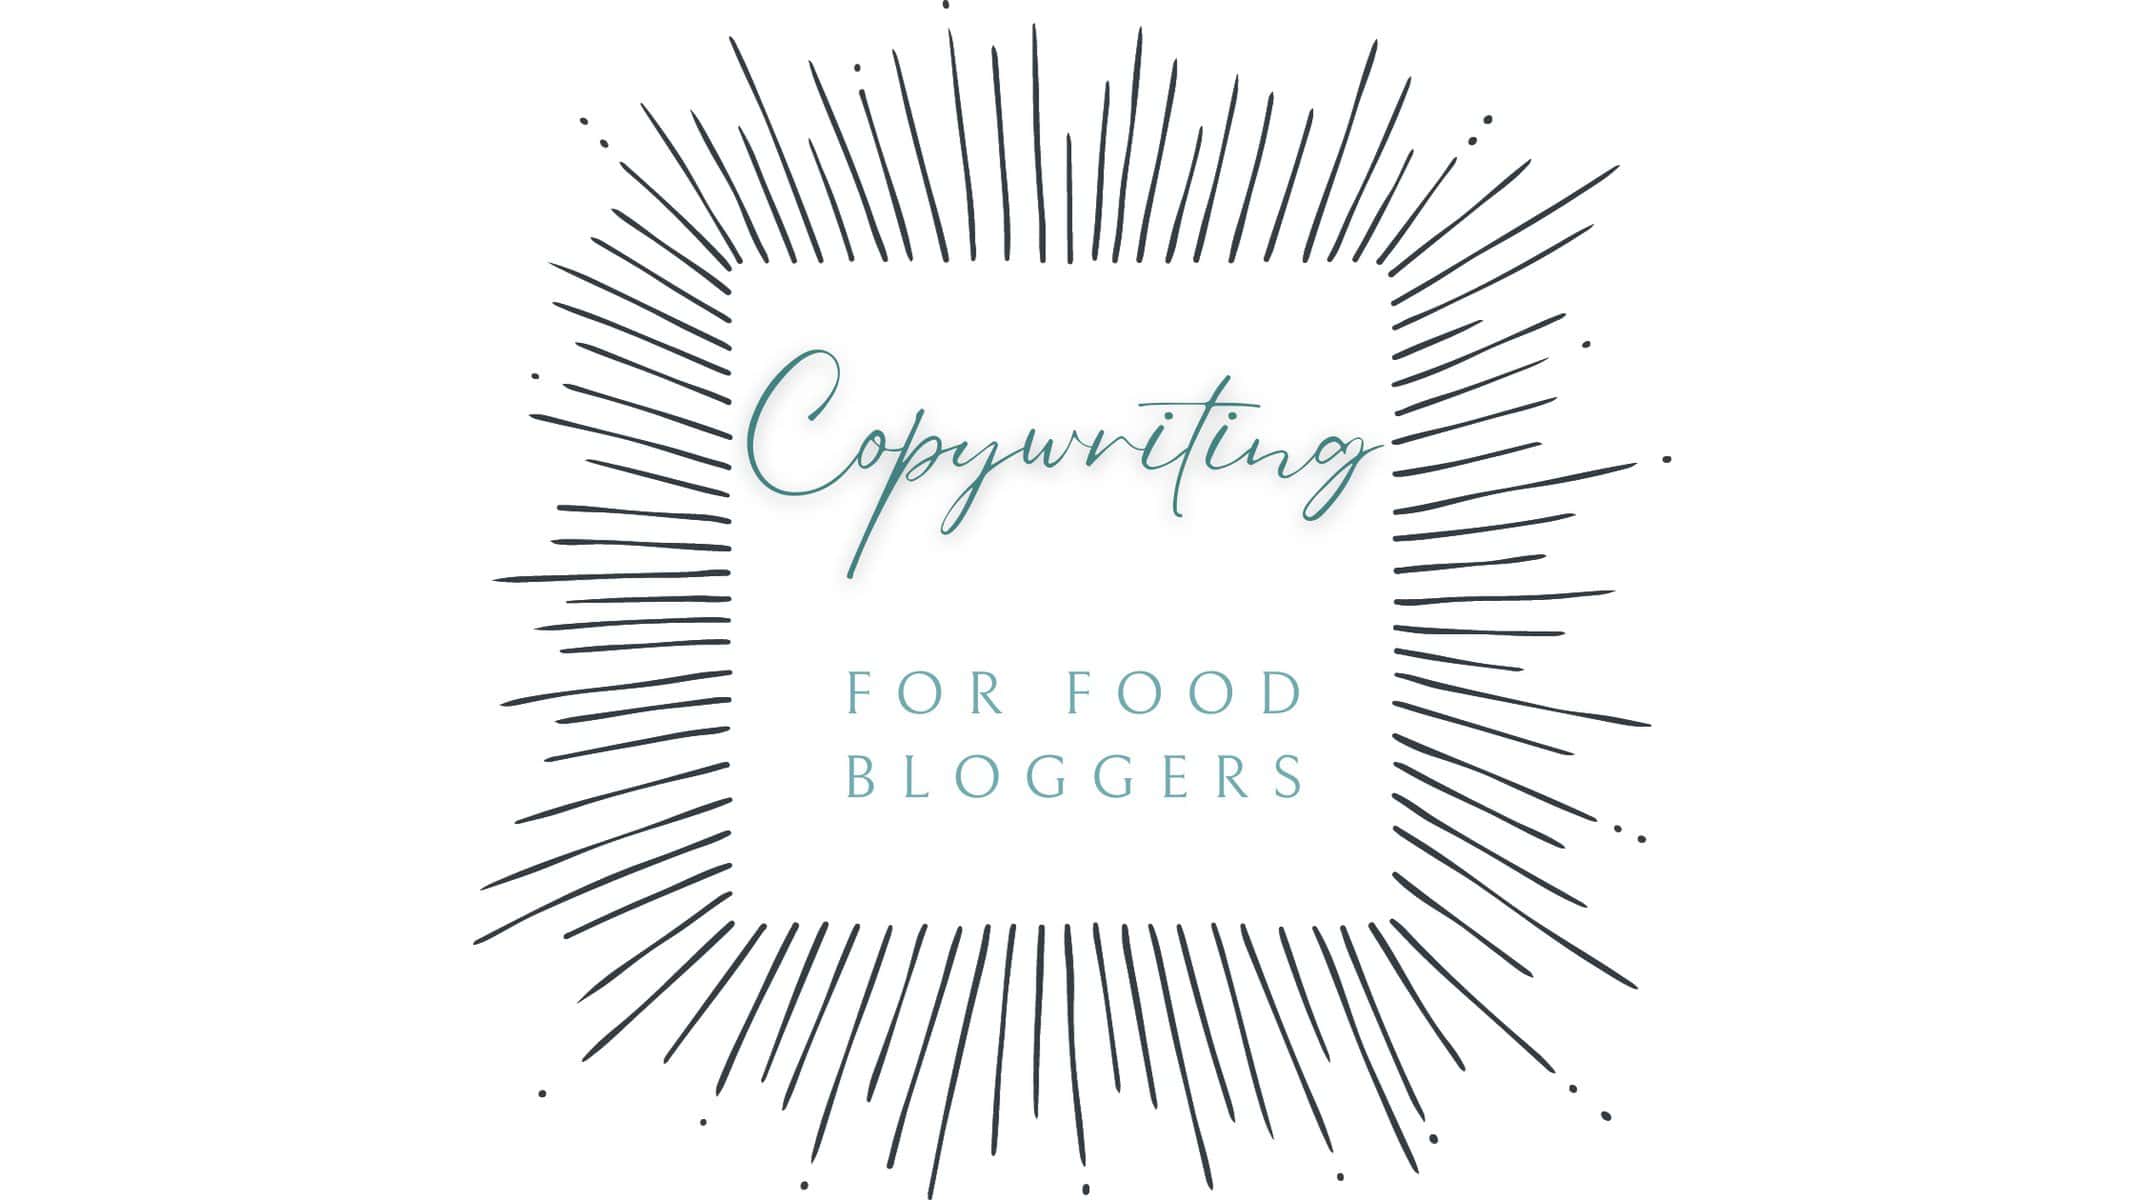 The logo for copywriting for food bloggers.